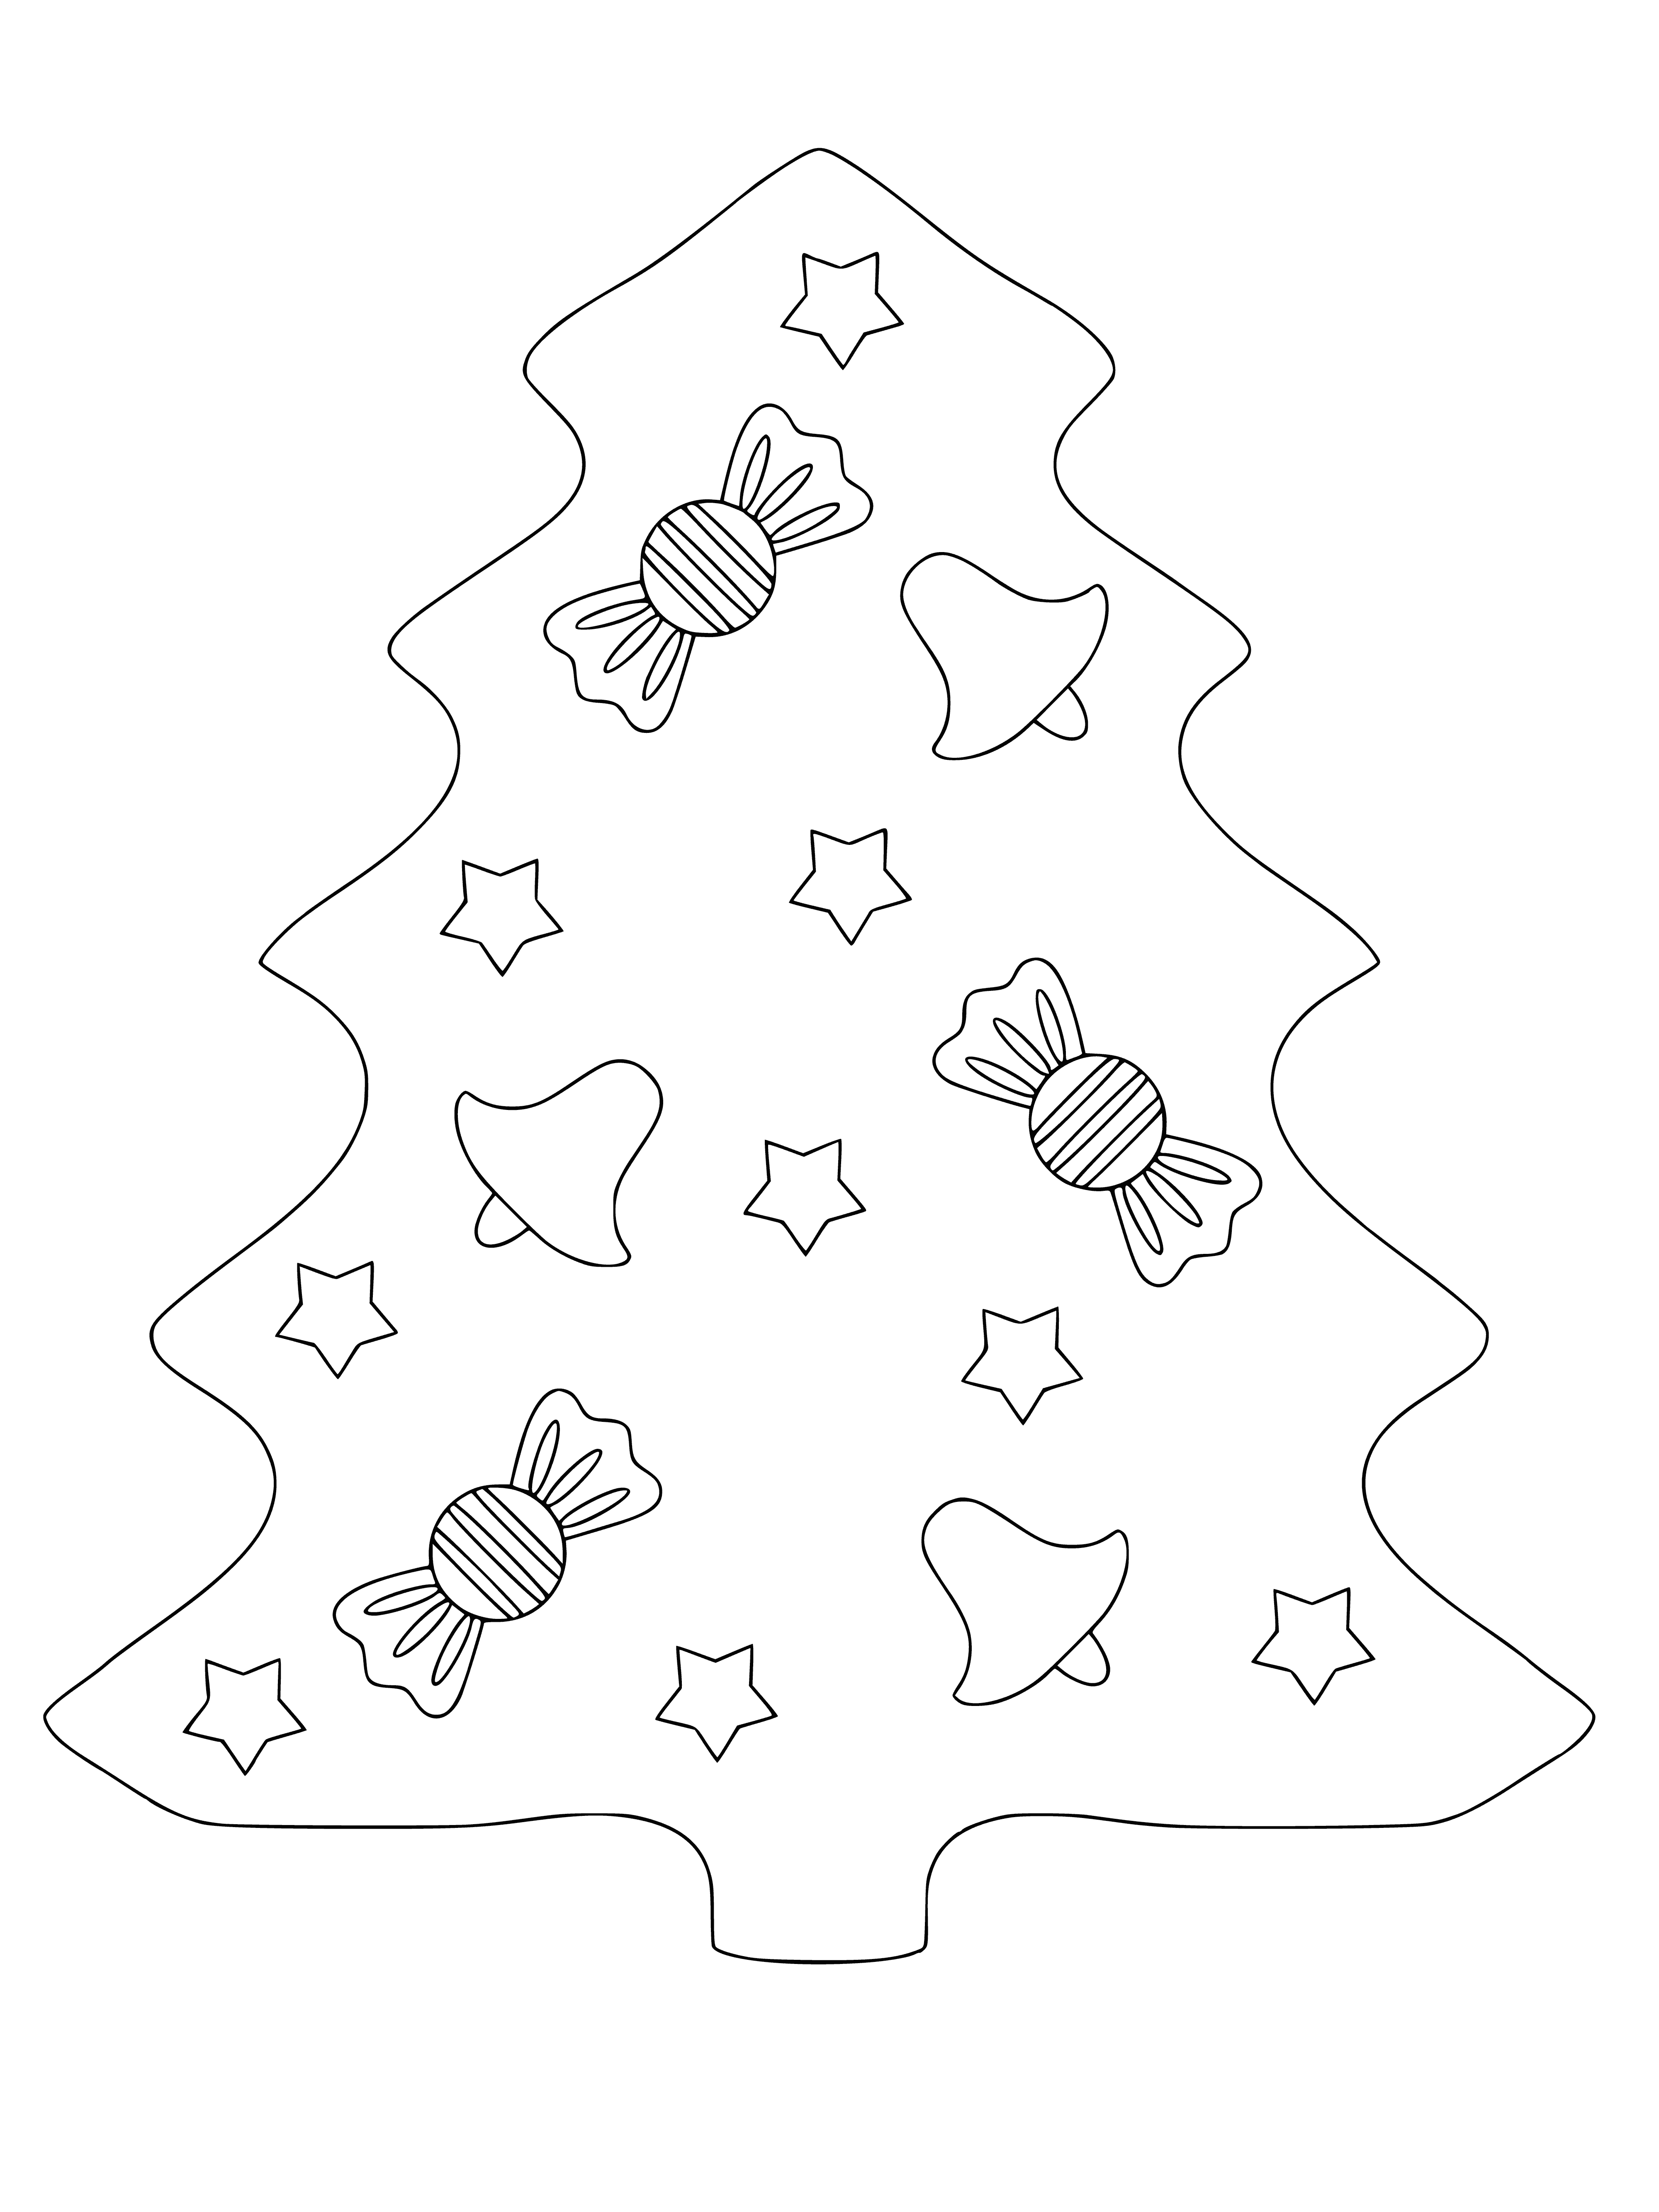 coloring page: Family decorates Christmas tree with ornaments, garland and star, ready to enjoy presents underneath. #ChristmasTraditions